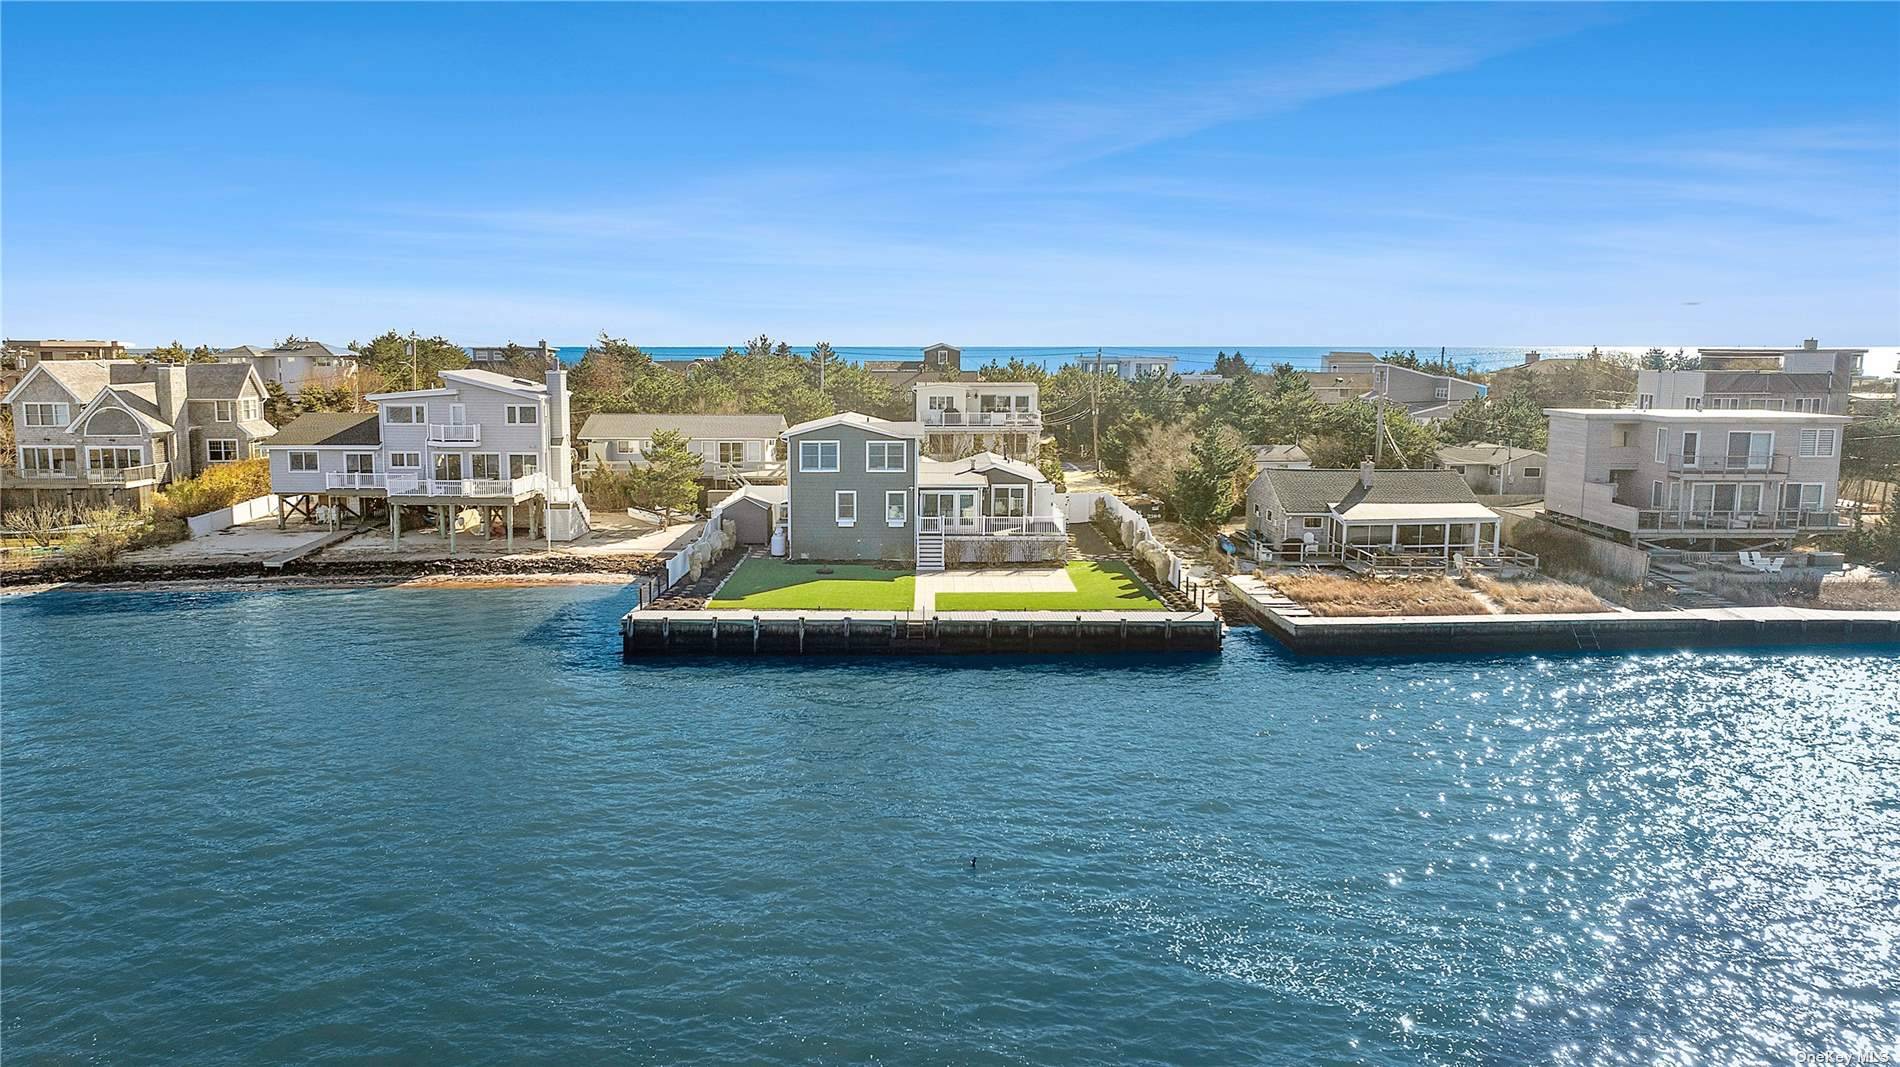 Nestled in the heart of Westhampton Beach, this turnkey bayfront property offers an idyllic blend of coastal living and modern comfort.